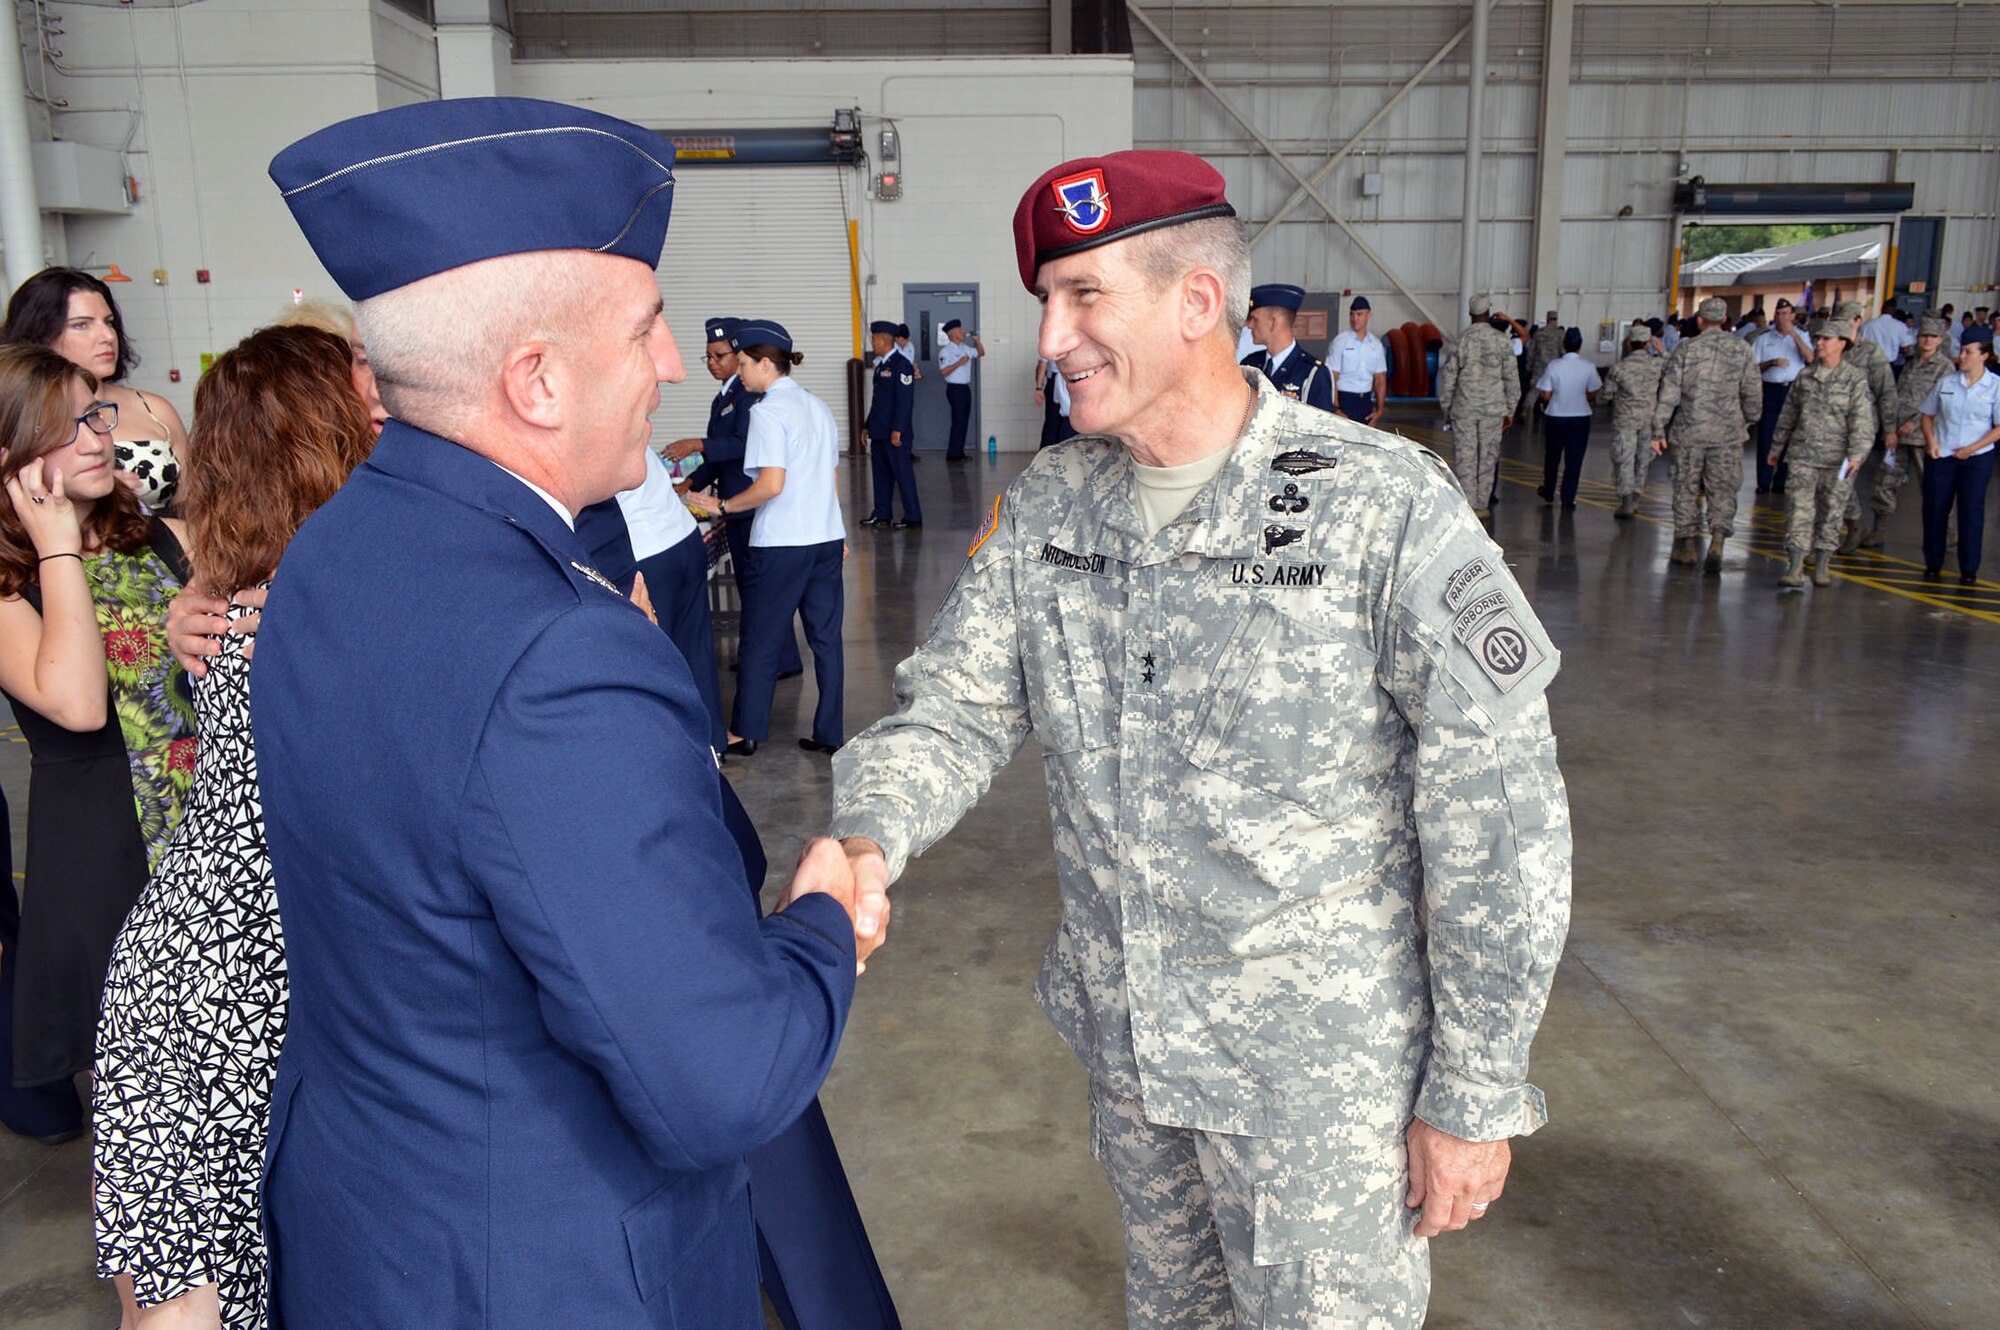 Maj. Gen. John W. Nicholson Jr., 82nd Airborne Division commanding general, congratulates Col. Kenneth E. Moss, 43rd Airlift Group commander, after Moss took command of the 43rd AG during the Group’s change of command ceremony on Aug. 5, Pope Army Airfield, N.C. Moss took command from the outgoing commander, Col. Daniel H. Tulley, who moves on to his next assignment as the commander for the 6th Air Mobility Wing, MacDill Air Force Base, Fla. (U.S. Air Force photo/Marvin Krause)